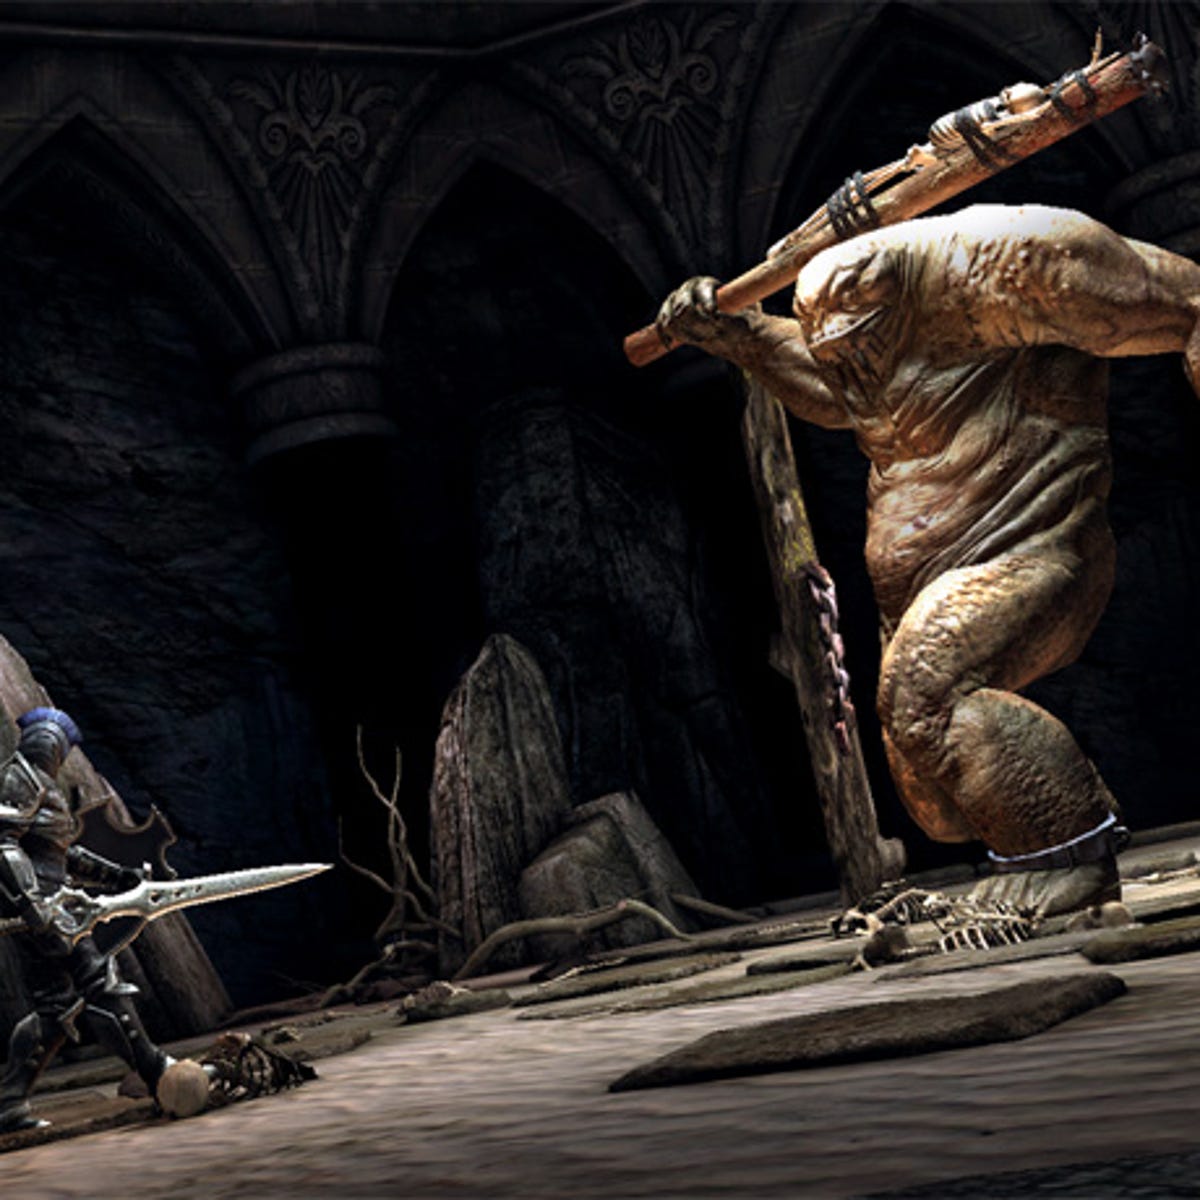 Infinity Blade gets beefy update as Epic Games boss hails iPad 2 games  potential - CNET